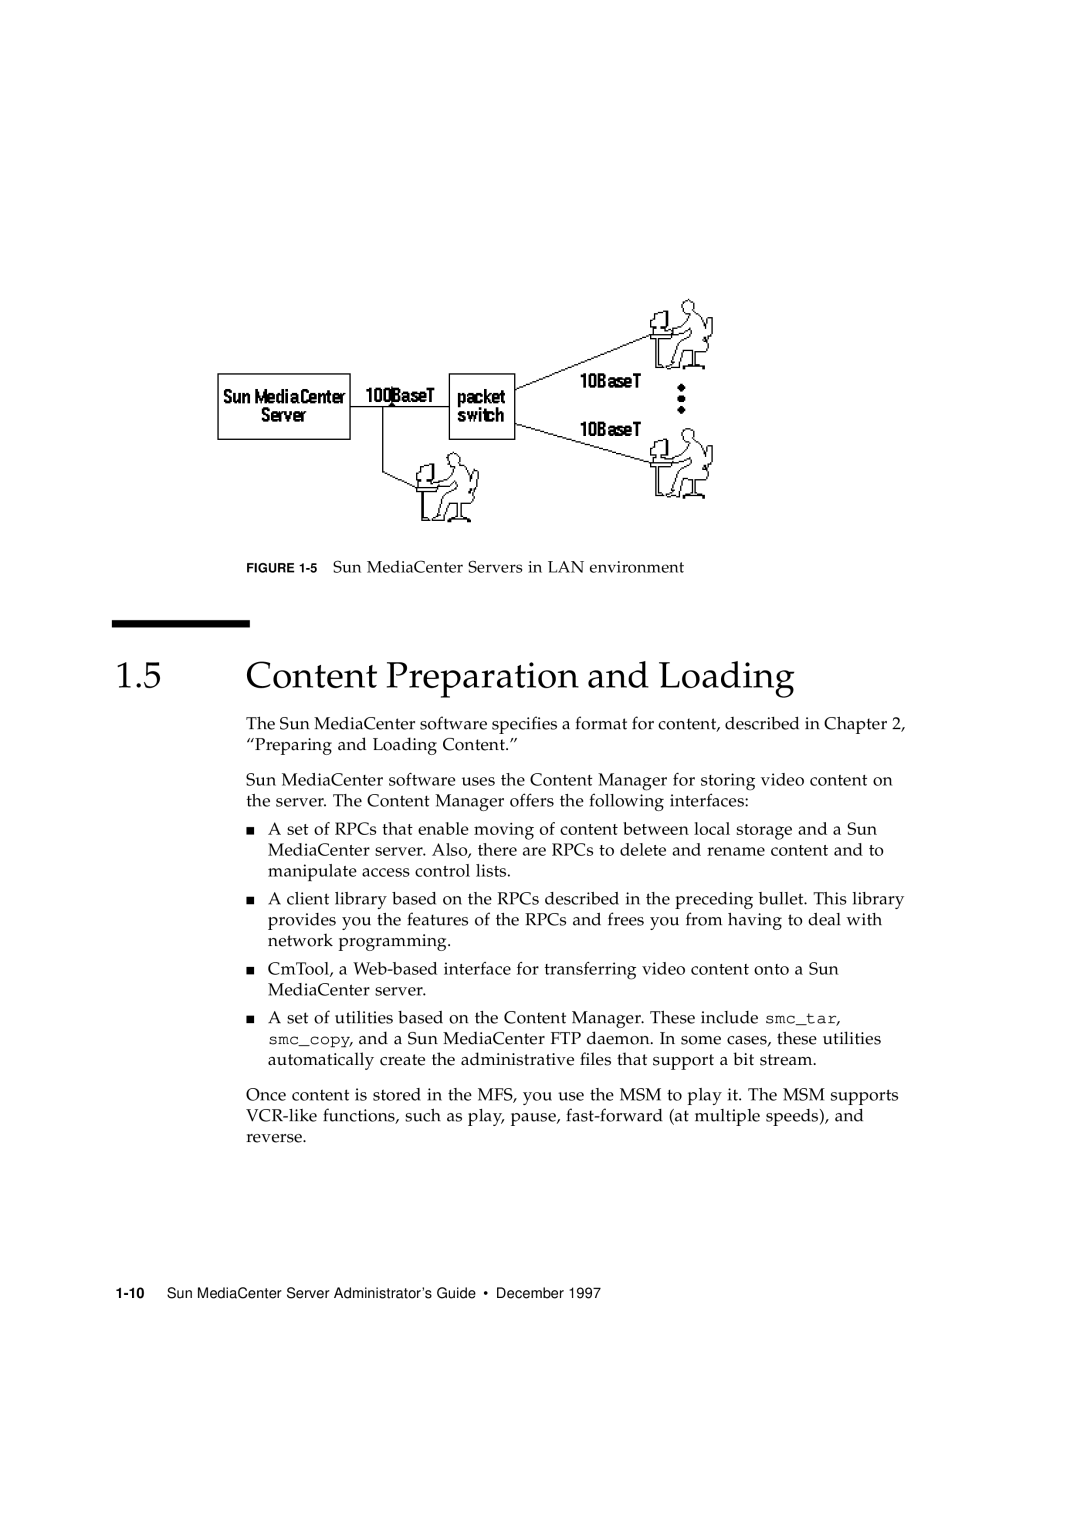 Sun Microsystems 2.1 manual Content Preparation and Loading, 5 Sun MediaCenter Servers in LAN environment 